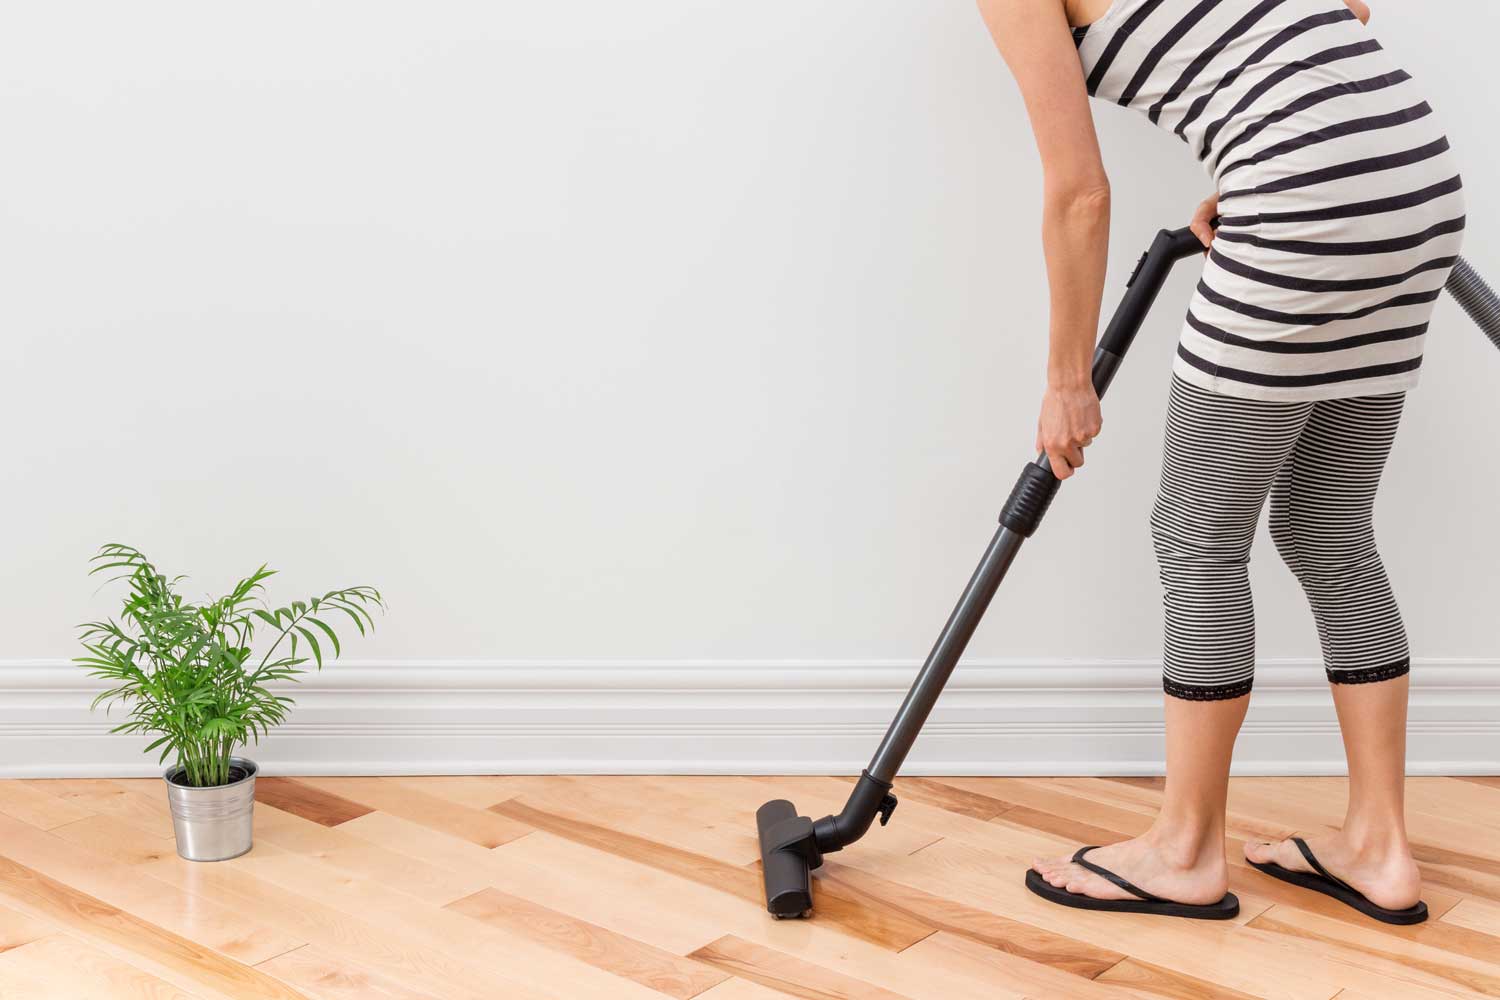 Regulary vacuum or sweep floors to remove dirt and keep your home floors looking amazing - tips from Footprints Floors in Dayton.